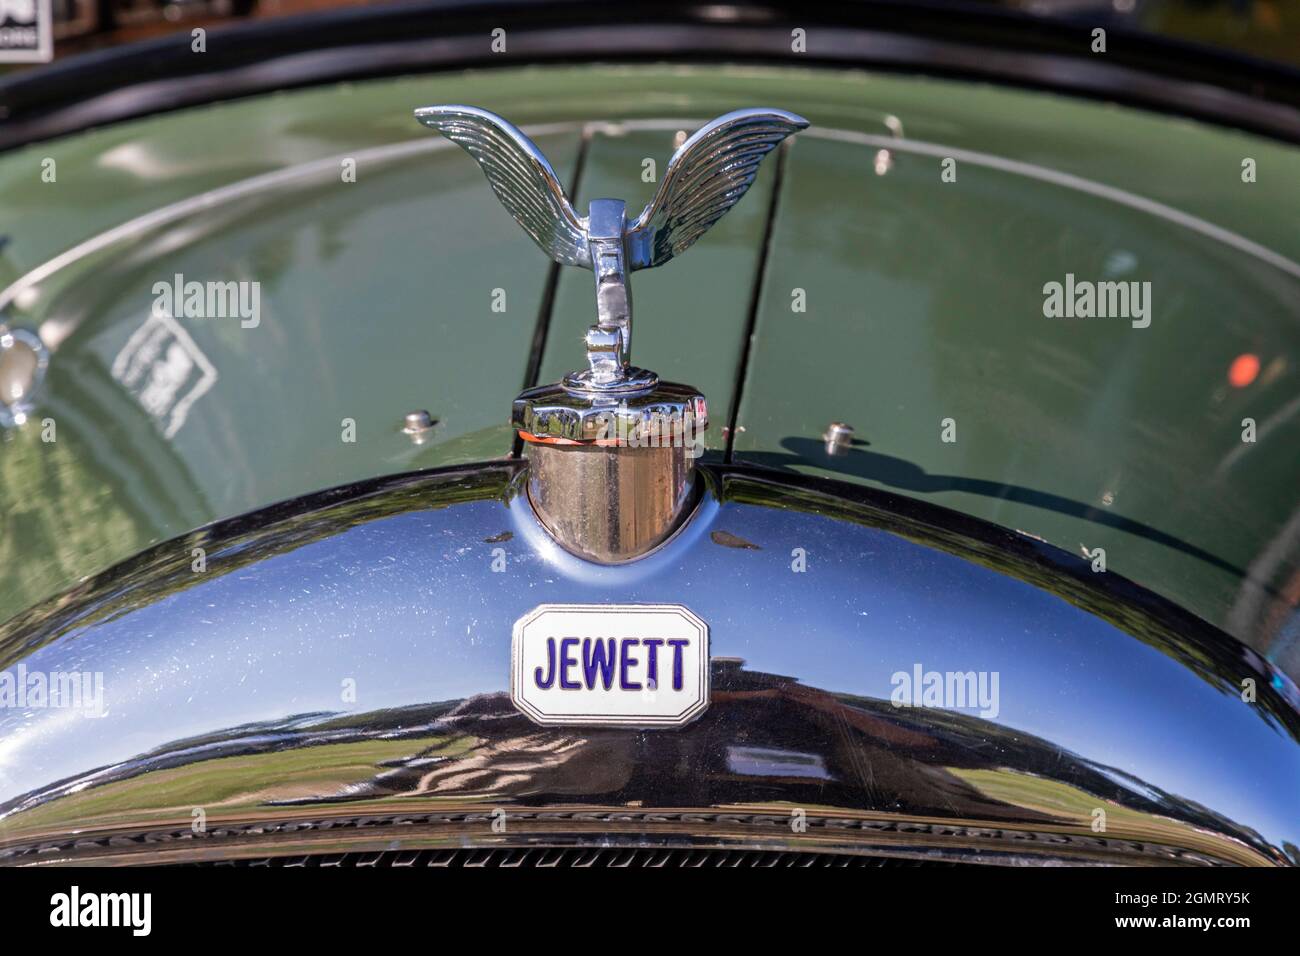 Grosse Pointe Shores, Michigan - The hood ornament of a 1925 Jewett sedan at the Eyes on Design auto show. This year's show featured primarily brands Stock Photo